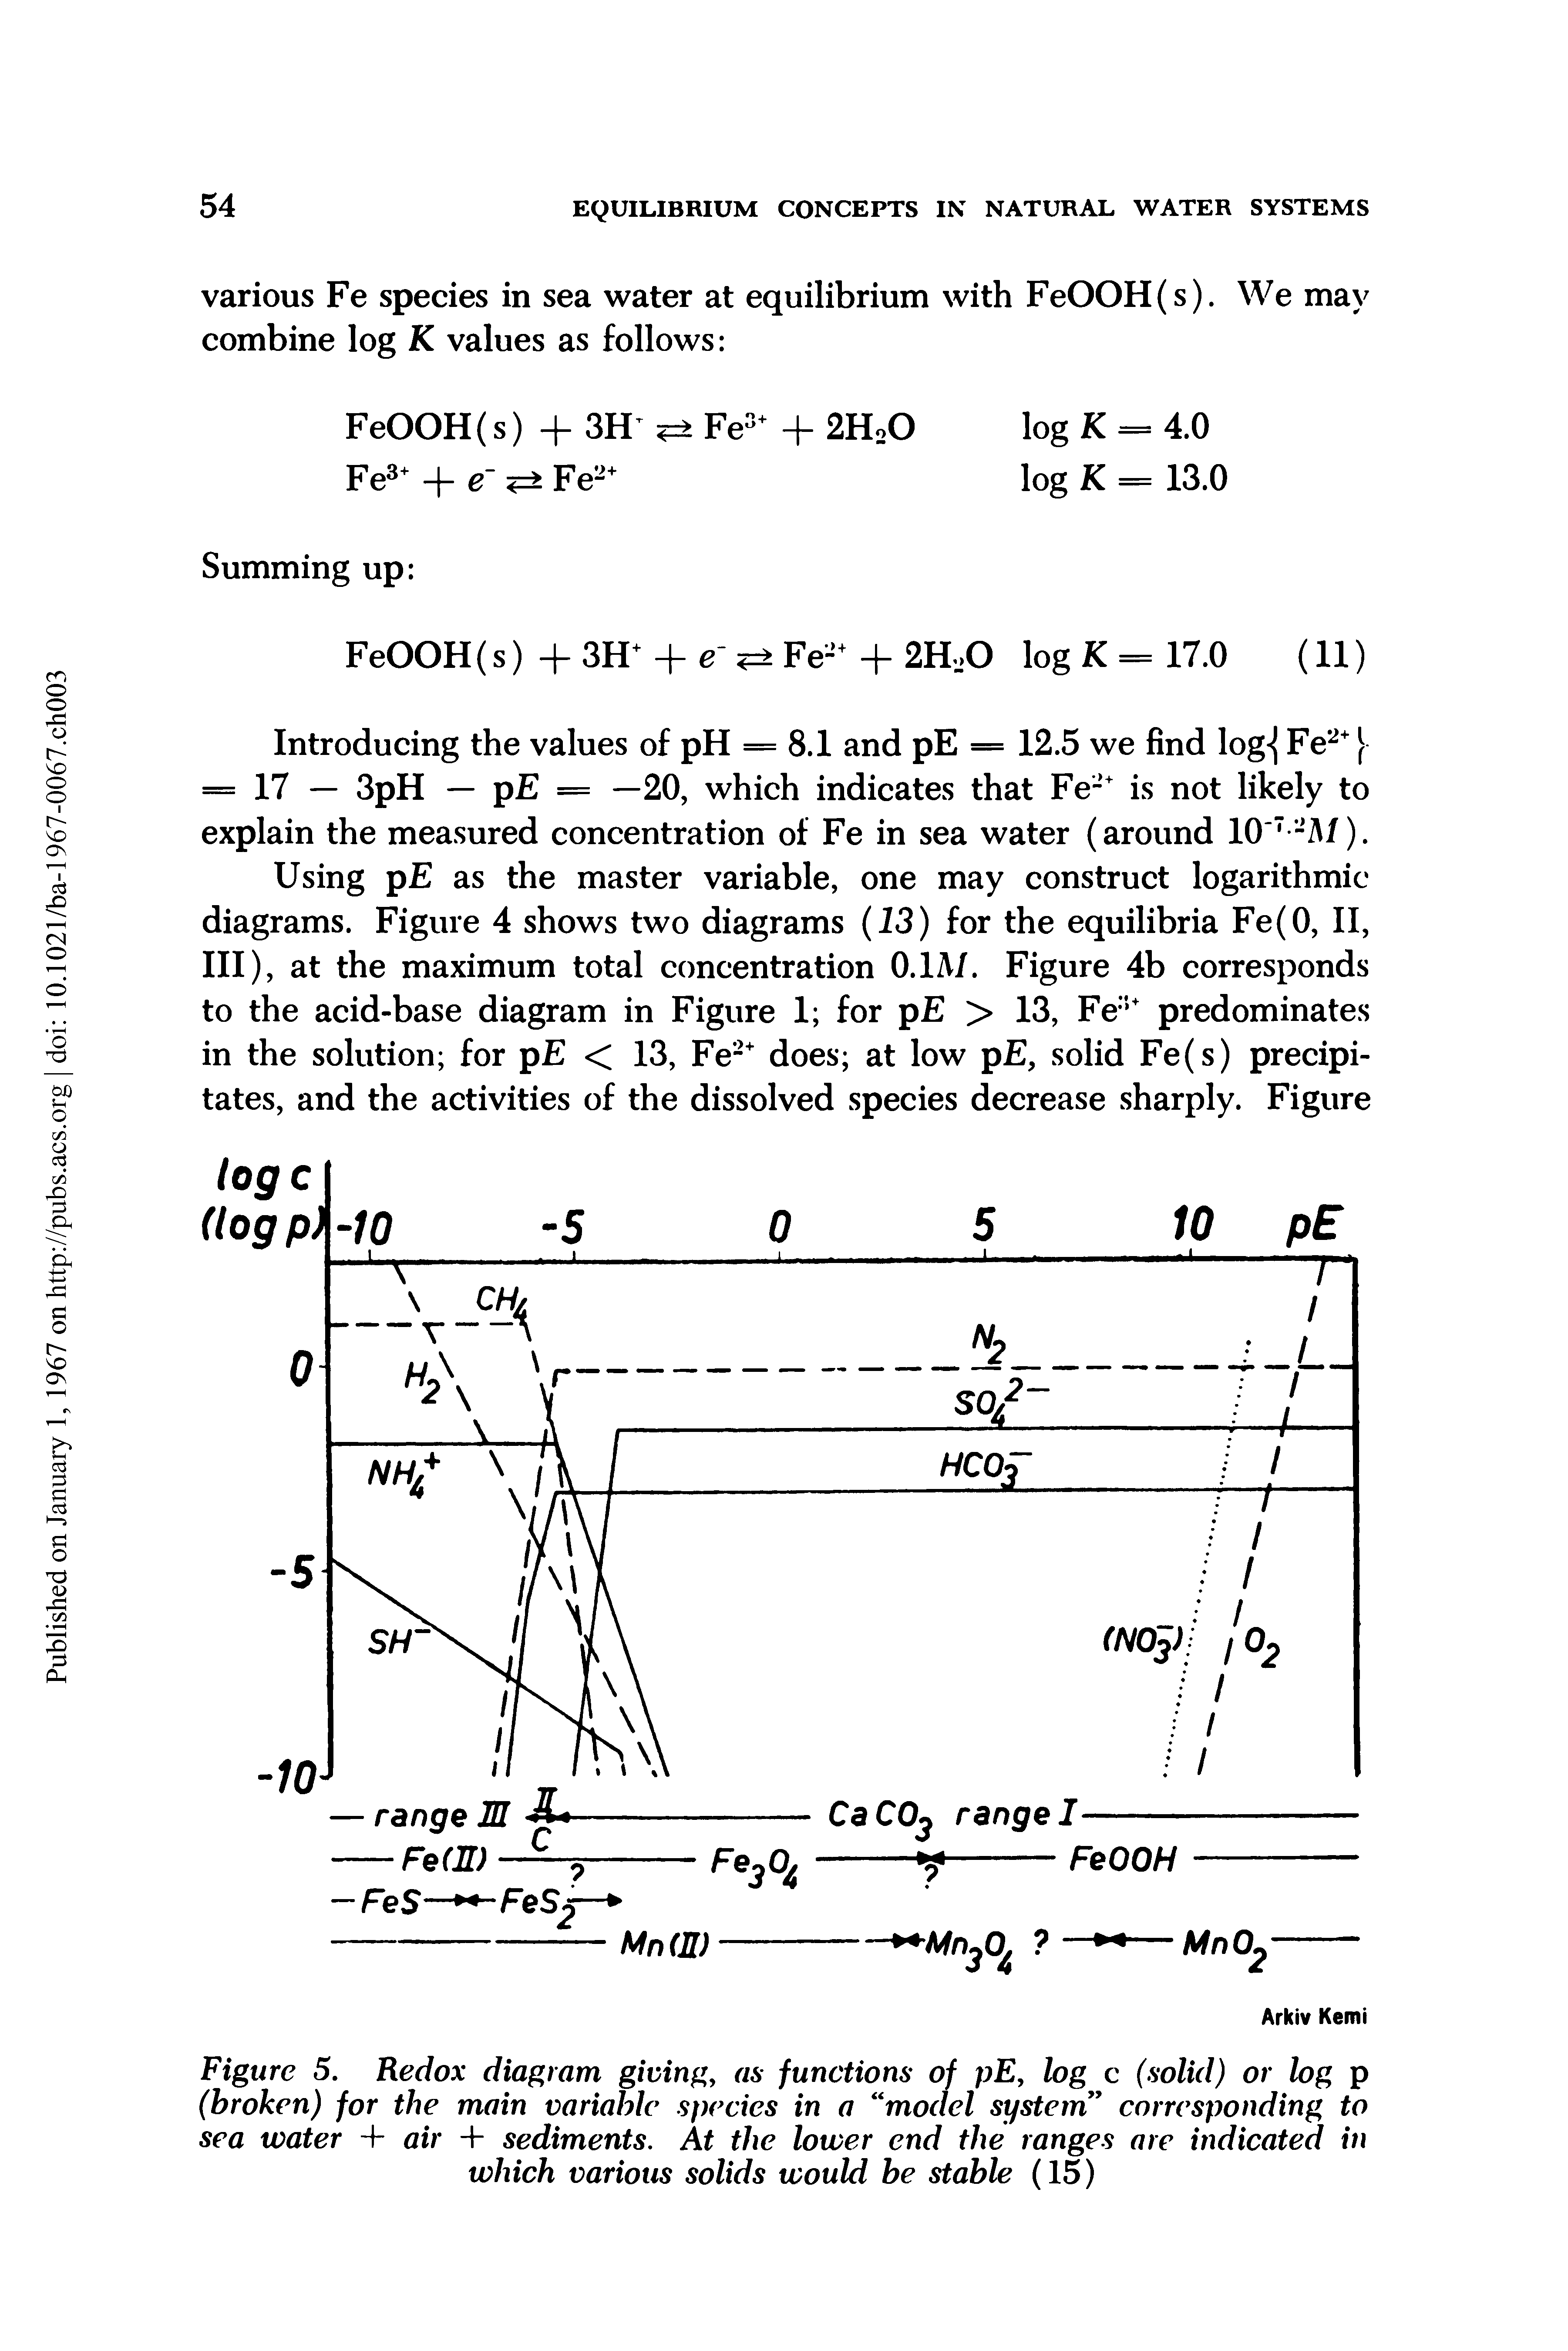 Figure 5. Redox diagram giving, as functions of pE, log c (solid) or log p (broken) for the main variable species in a model system corresponding to sea water 4- air + sediments. At the lower end the ranges are indicated in which various solids would be stable (15)...